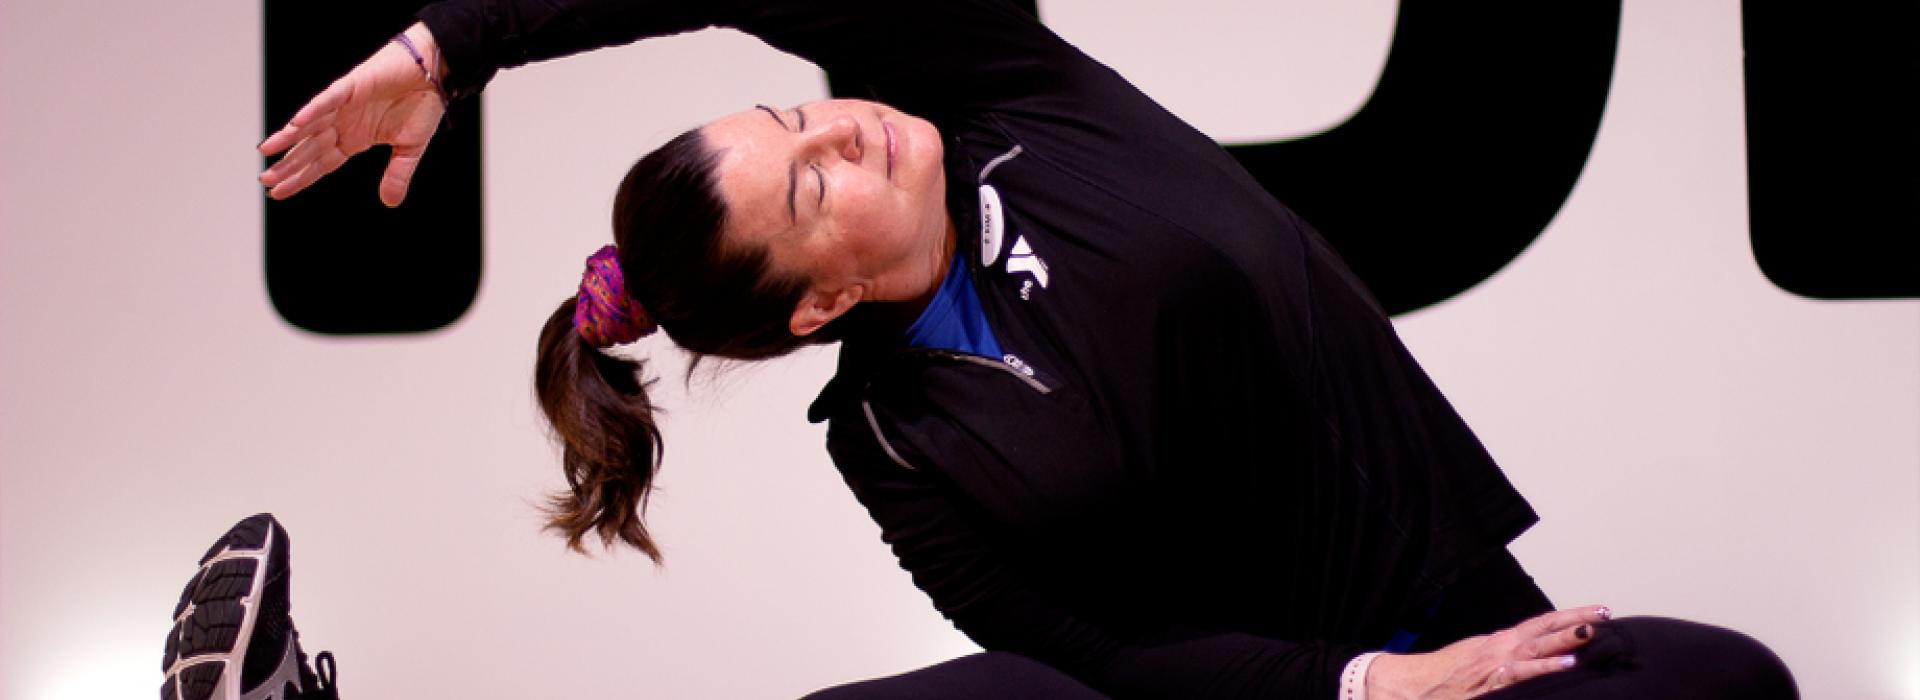 Personal trainer, Kim Petry at the YMCA is showing you how to do a few side bend stretches.